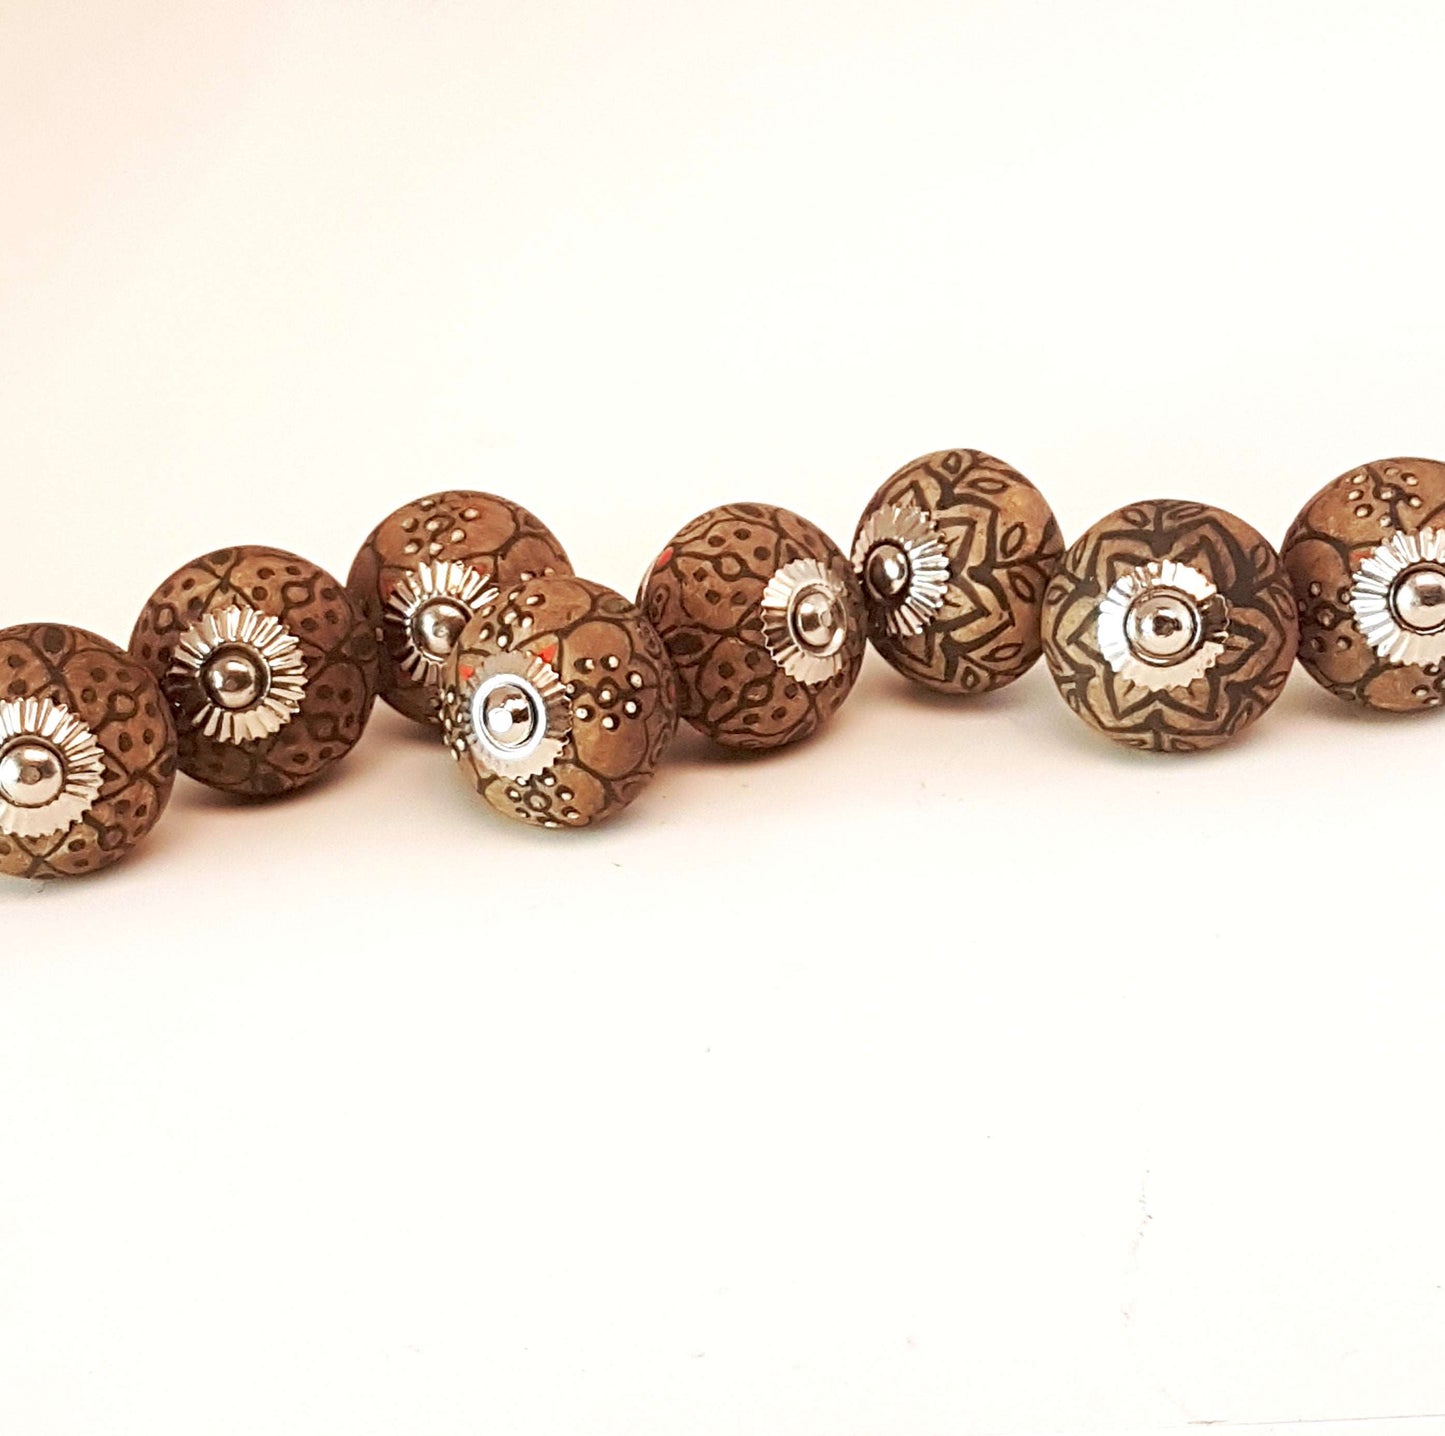 8 cabinet knobs hand painted in rustic country designs. Black & brown floral patterns with silver hardware. Easy and affordable DIY decor.